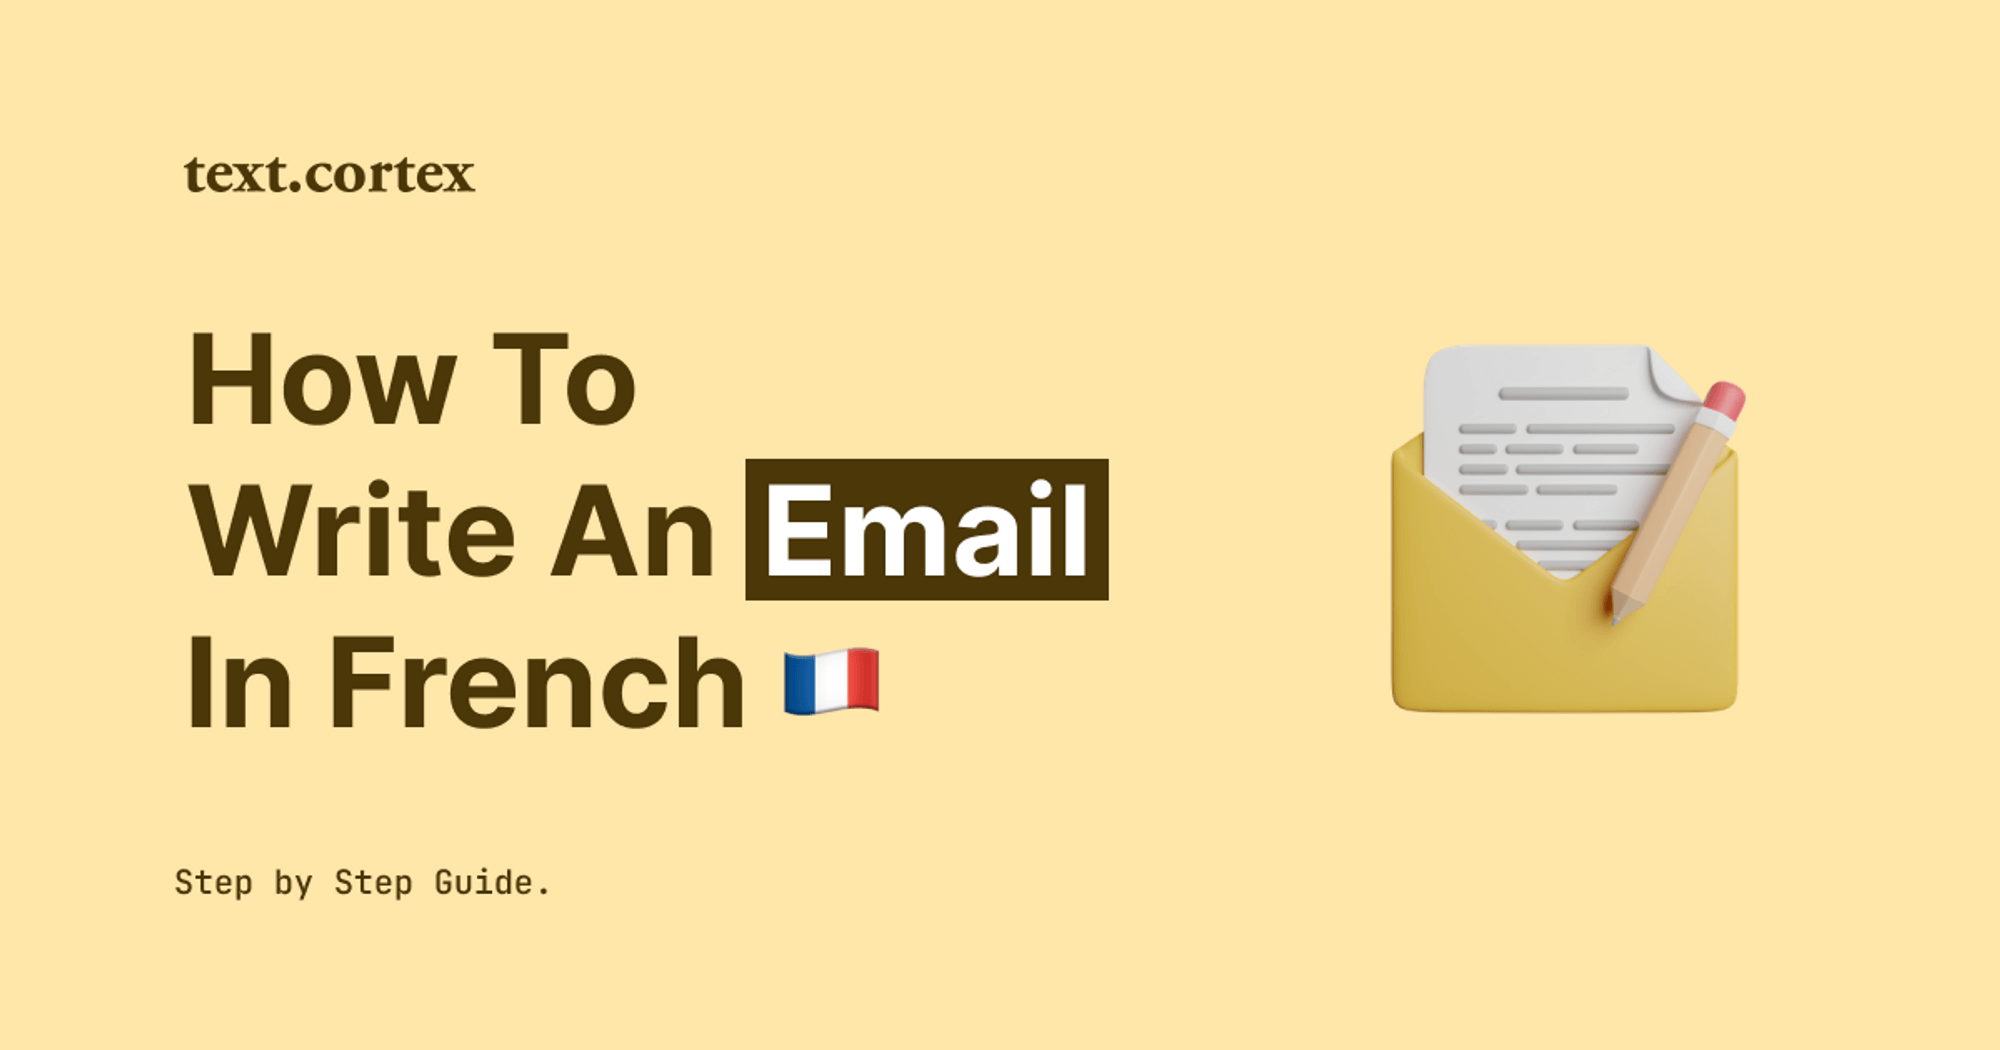 How To Write an Email in French - Step-by-Step Guide